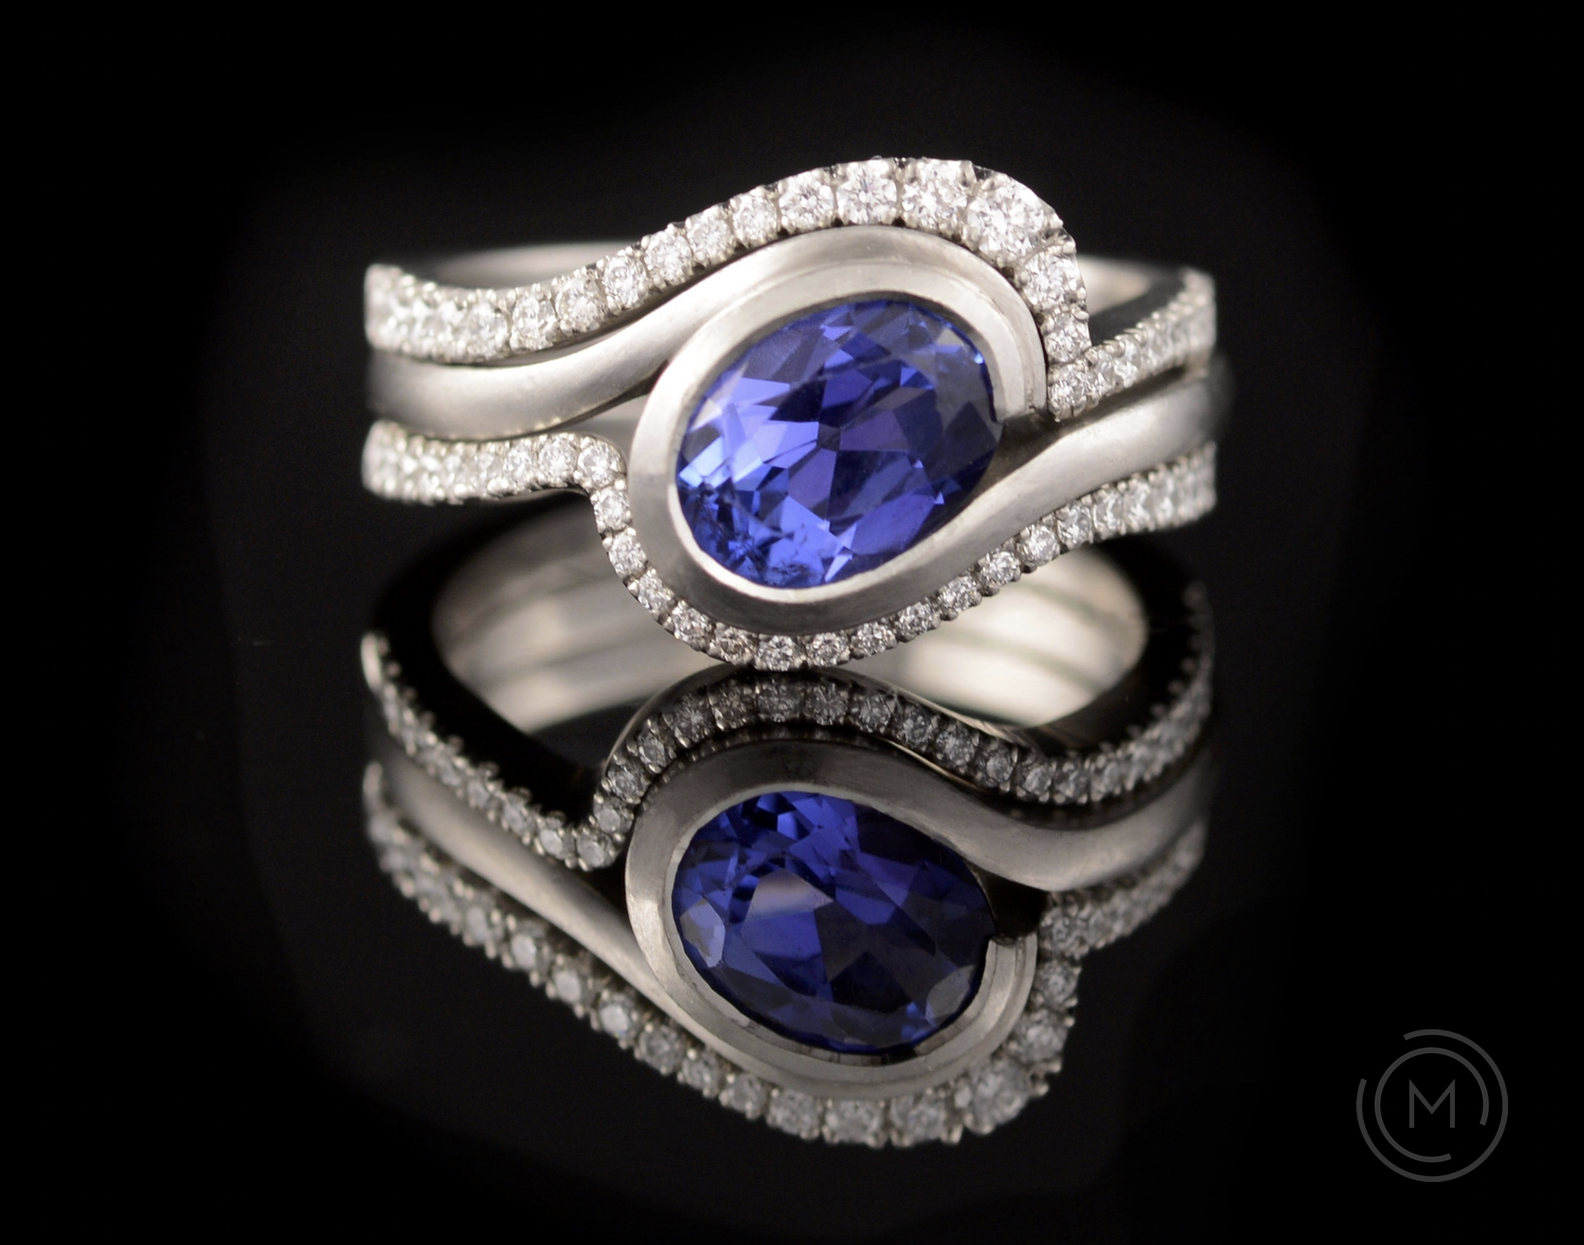 Tanzanite and white gold engagement ring with matching fitted diamond bands